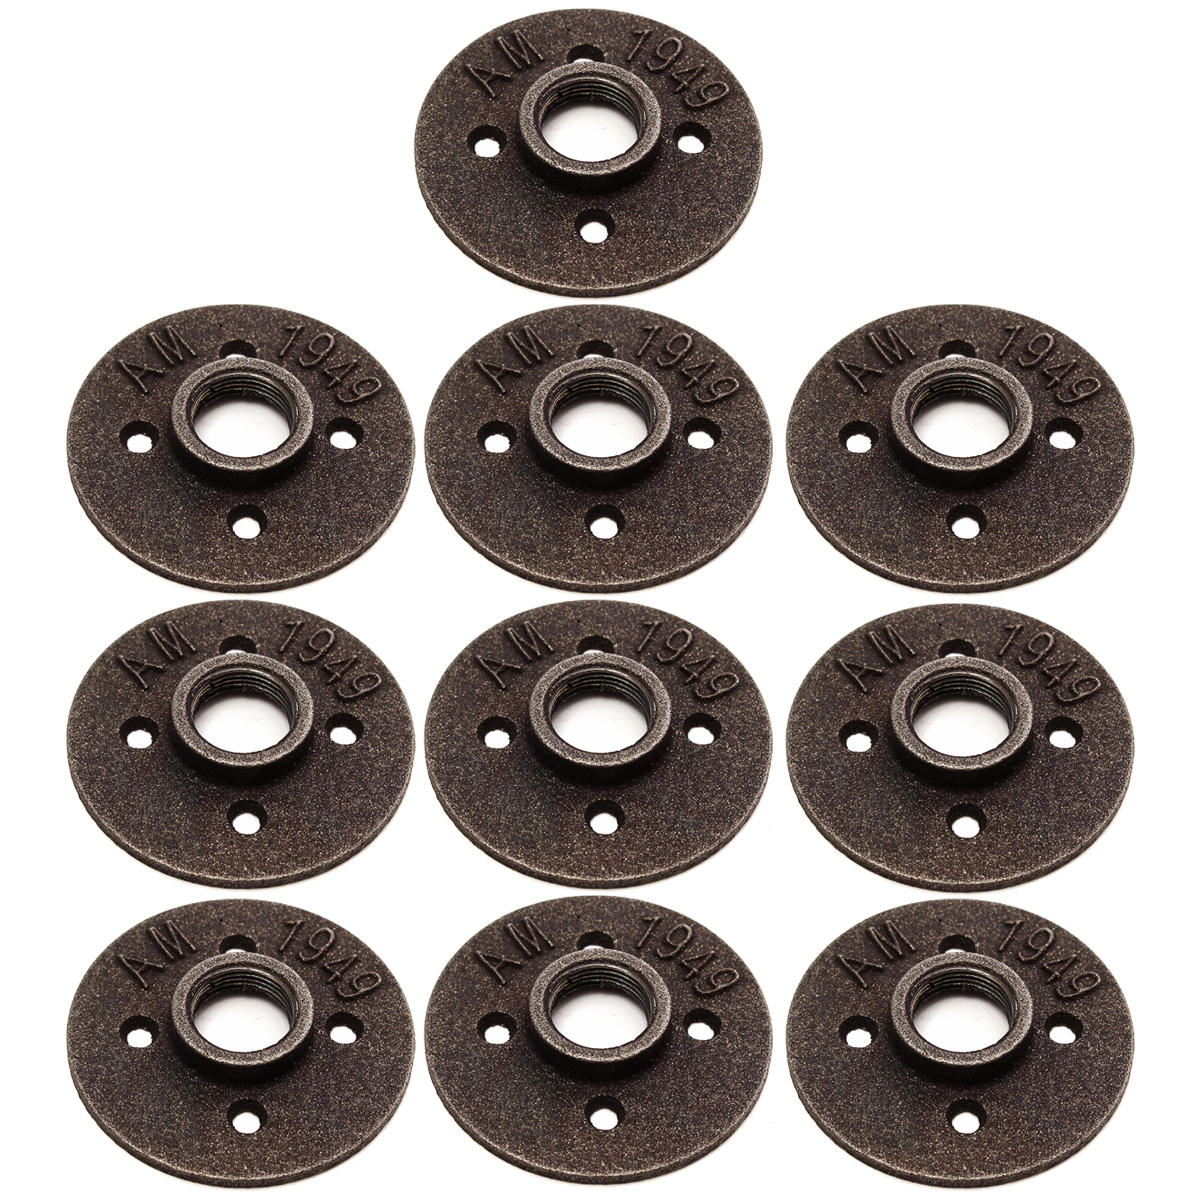 

10pcs 3/4 Inch Black Malleable Iron Floor Flange Fitting Pipe NPT Antique Wall Flange Seat